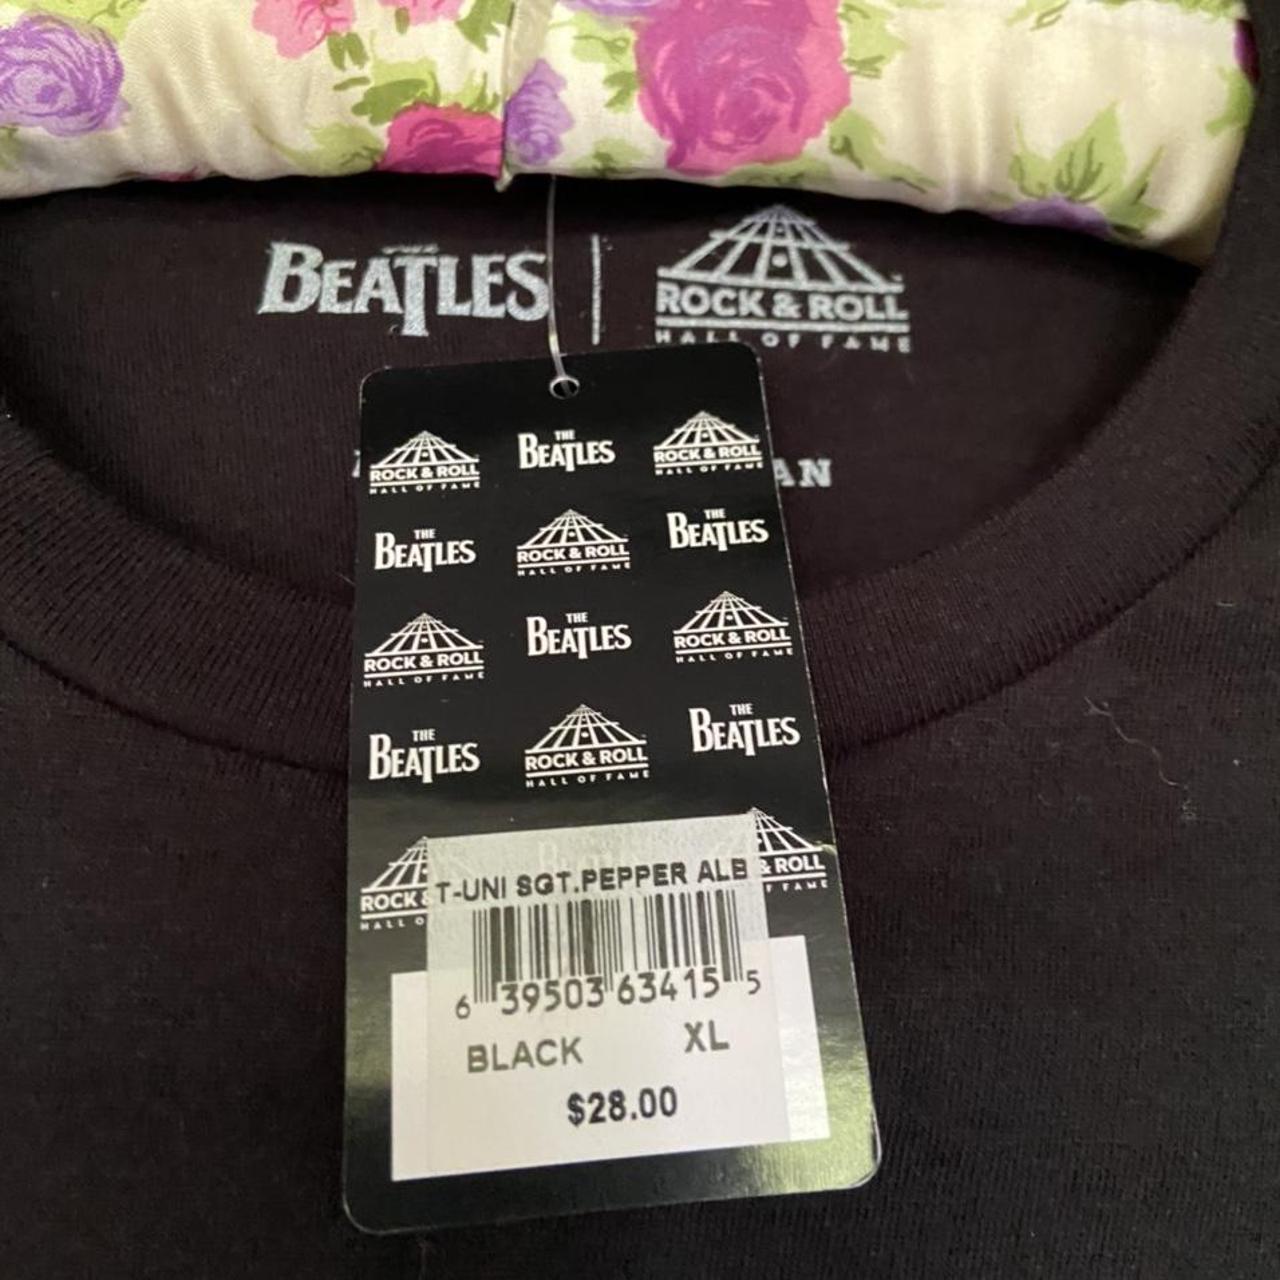 Product Image 3 - THE BEATLES SGT PEPPER SHIRT

🍁AWAY